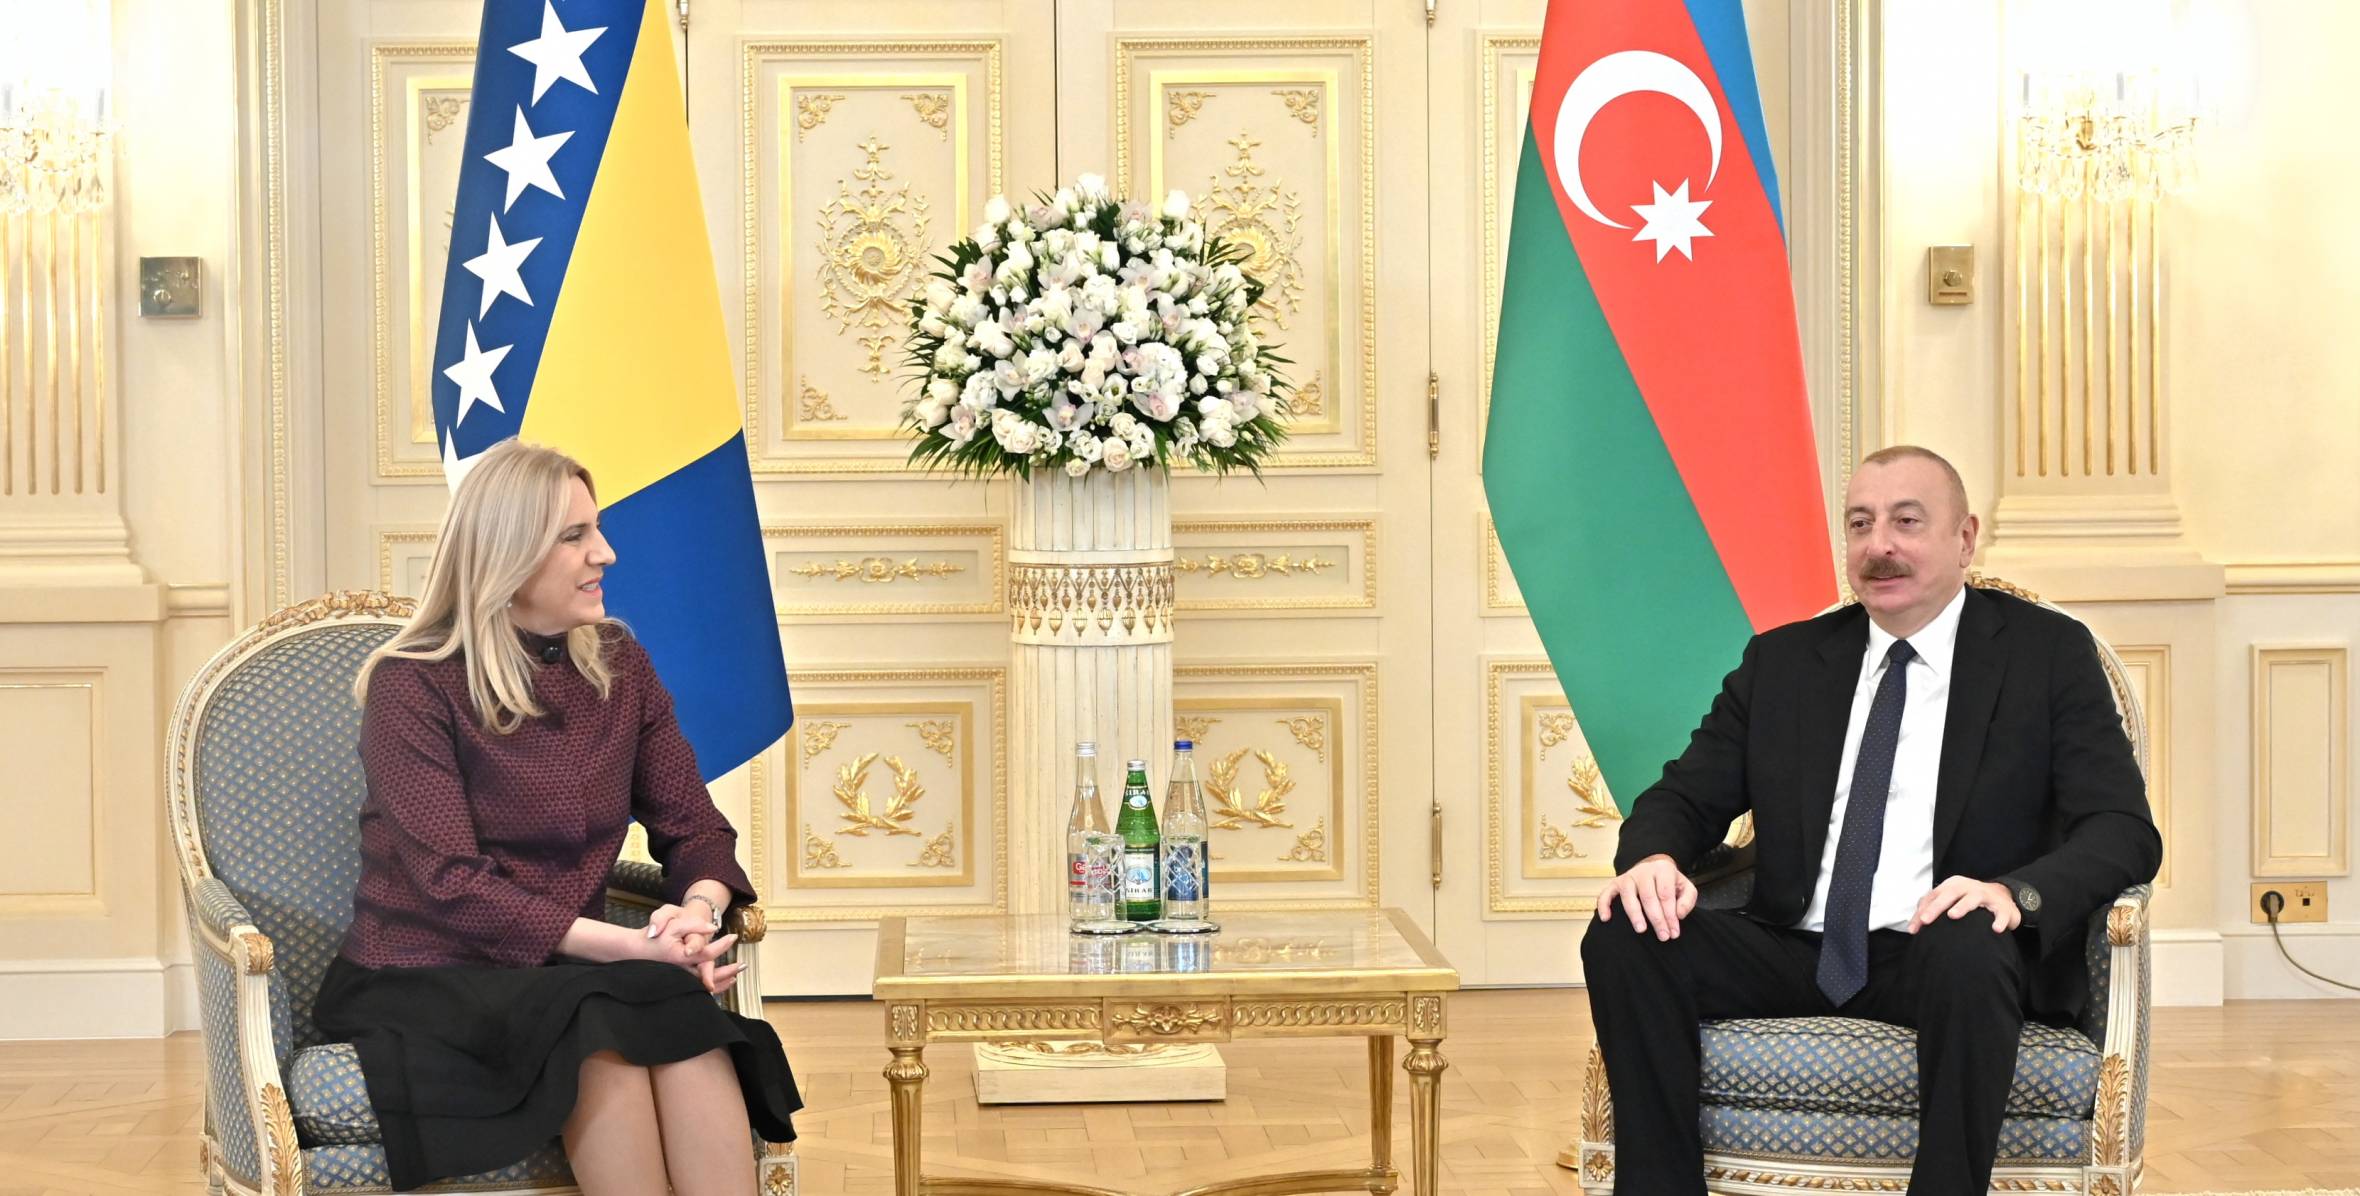 Ilham Aliyev met with the Chairwoman of the Presidency of Bosnia and Herzegovina